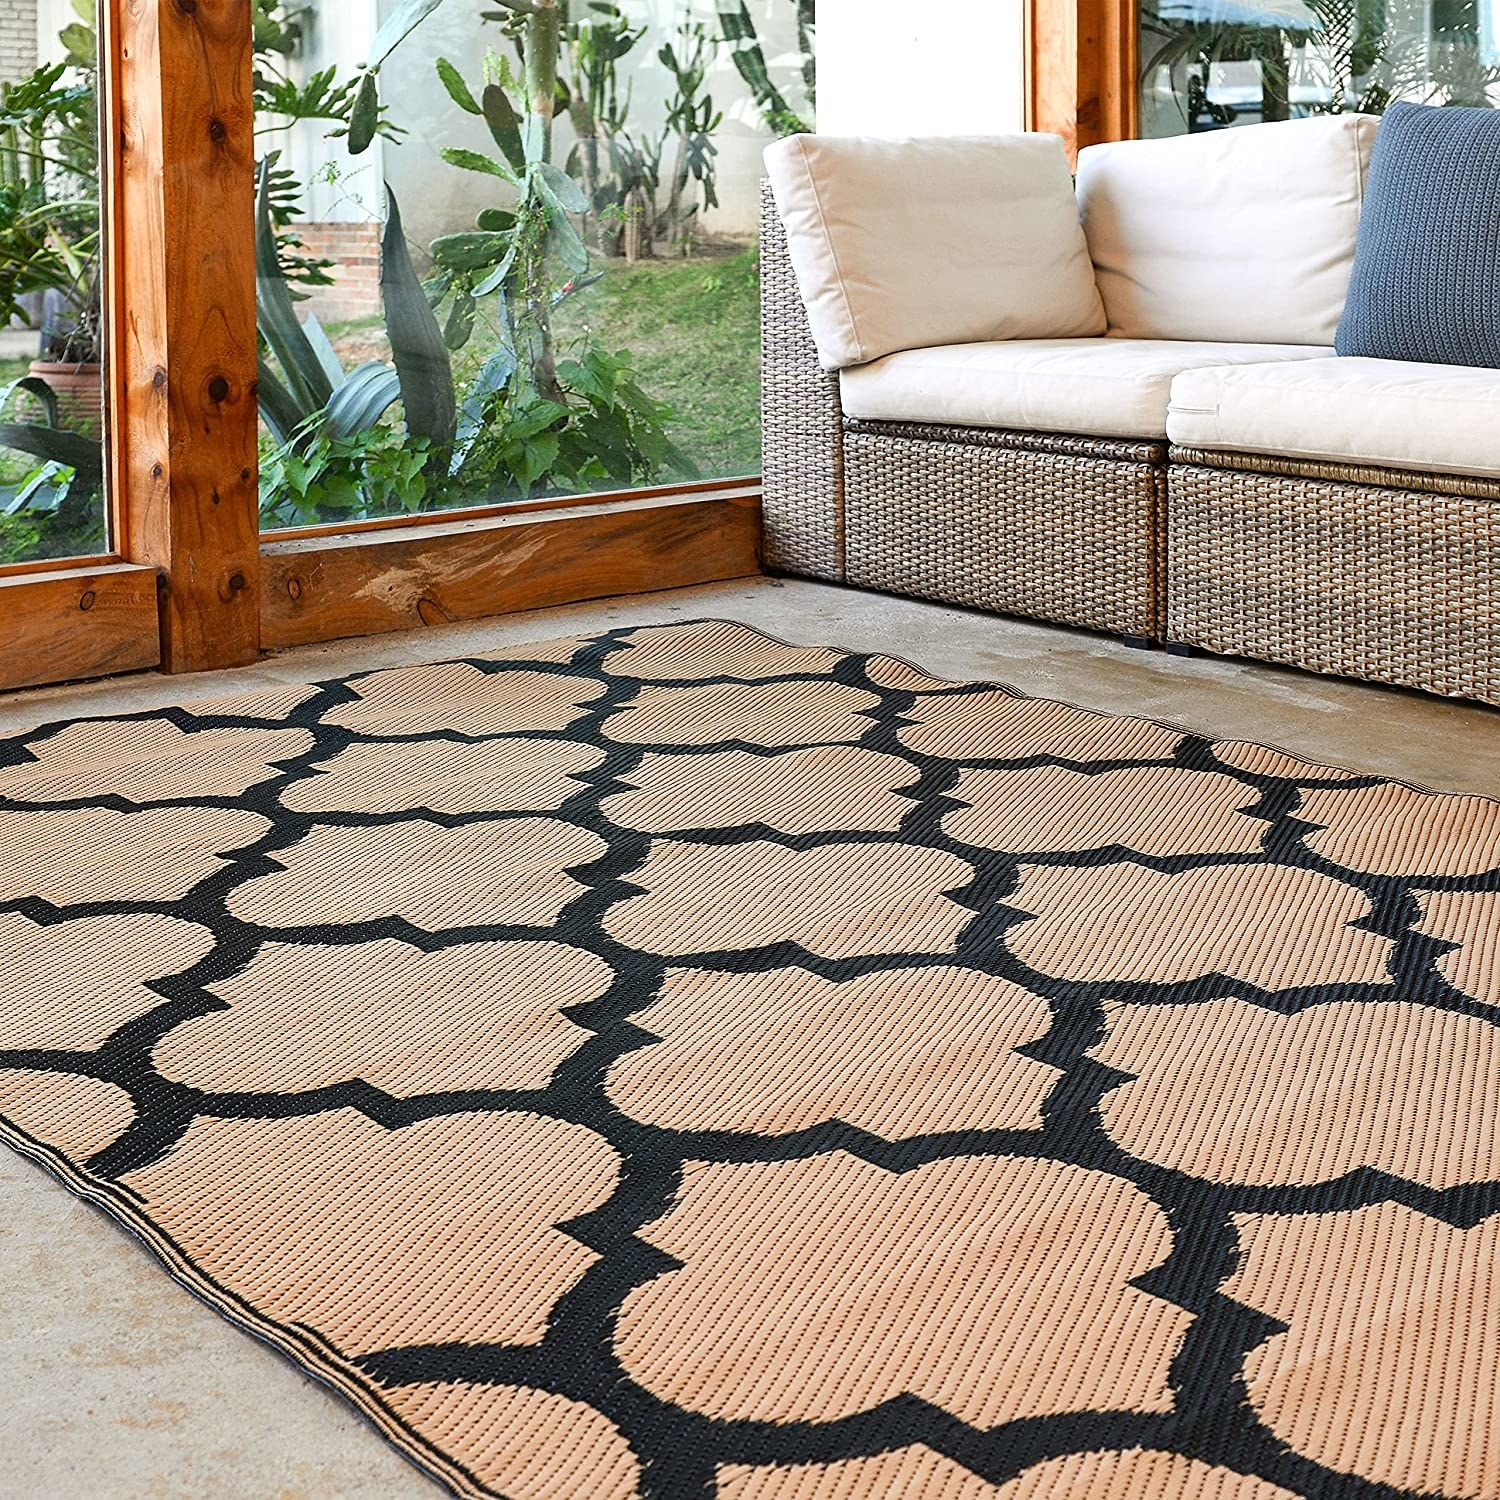 The rug on the ground in front of patio furniture